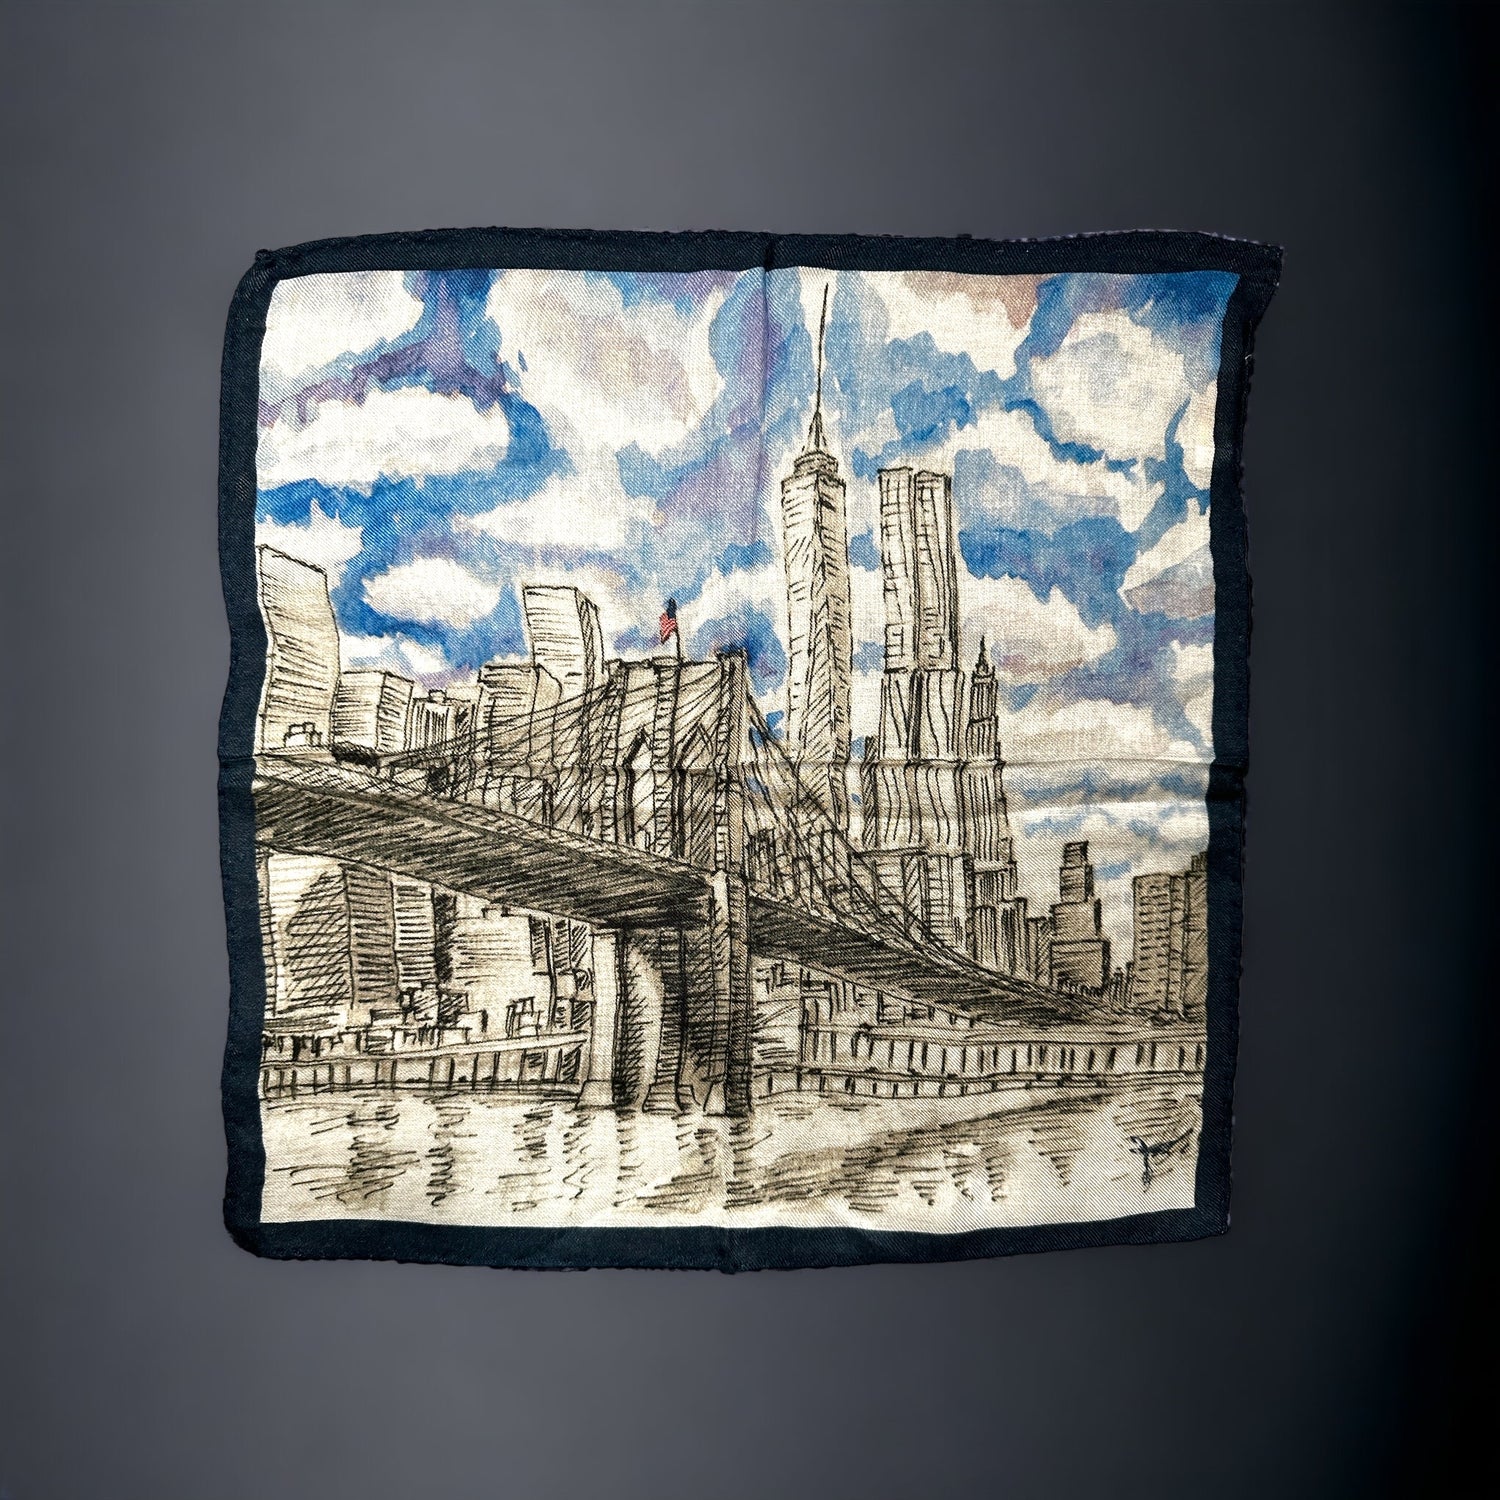 A silk pocket square of the New York City skyline as seen from the Brooklyn Bridge. Nothing more iconic than NYC and here it is shown in a beautiful watercolor and pencil artwork on a silk pocket square complete with a party cloudy sky. Hand rolled edges. 